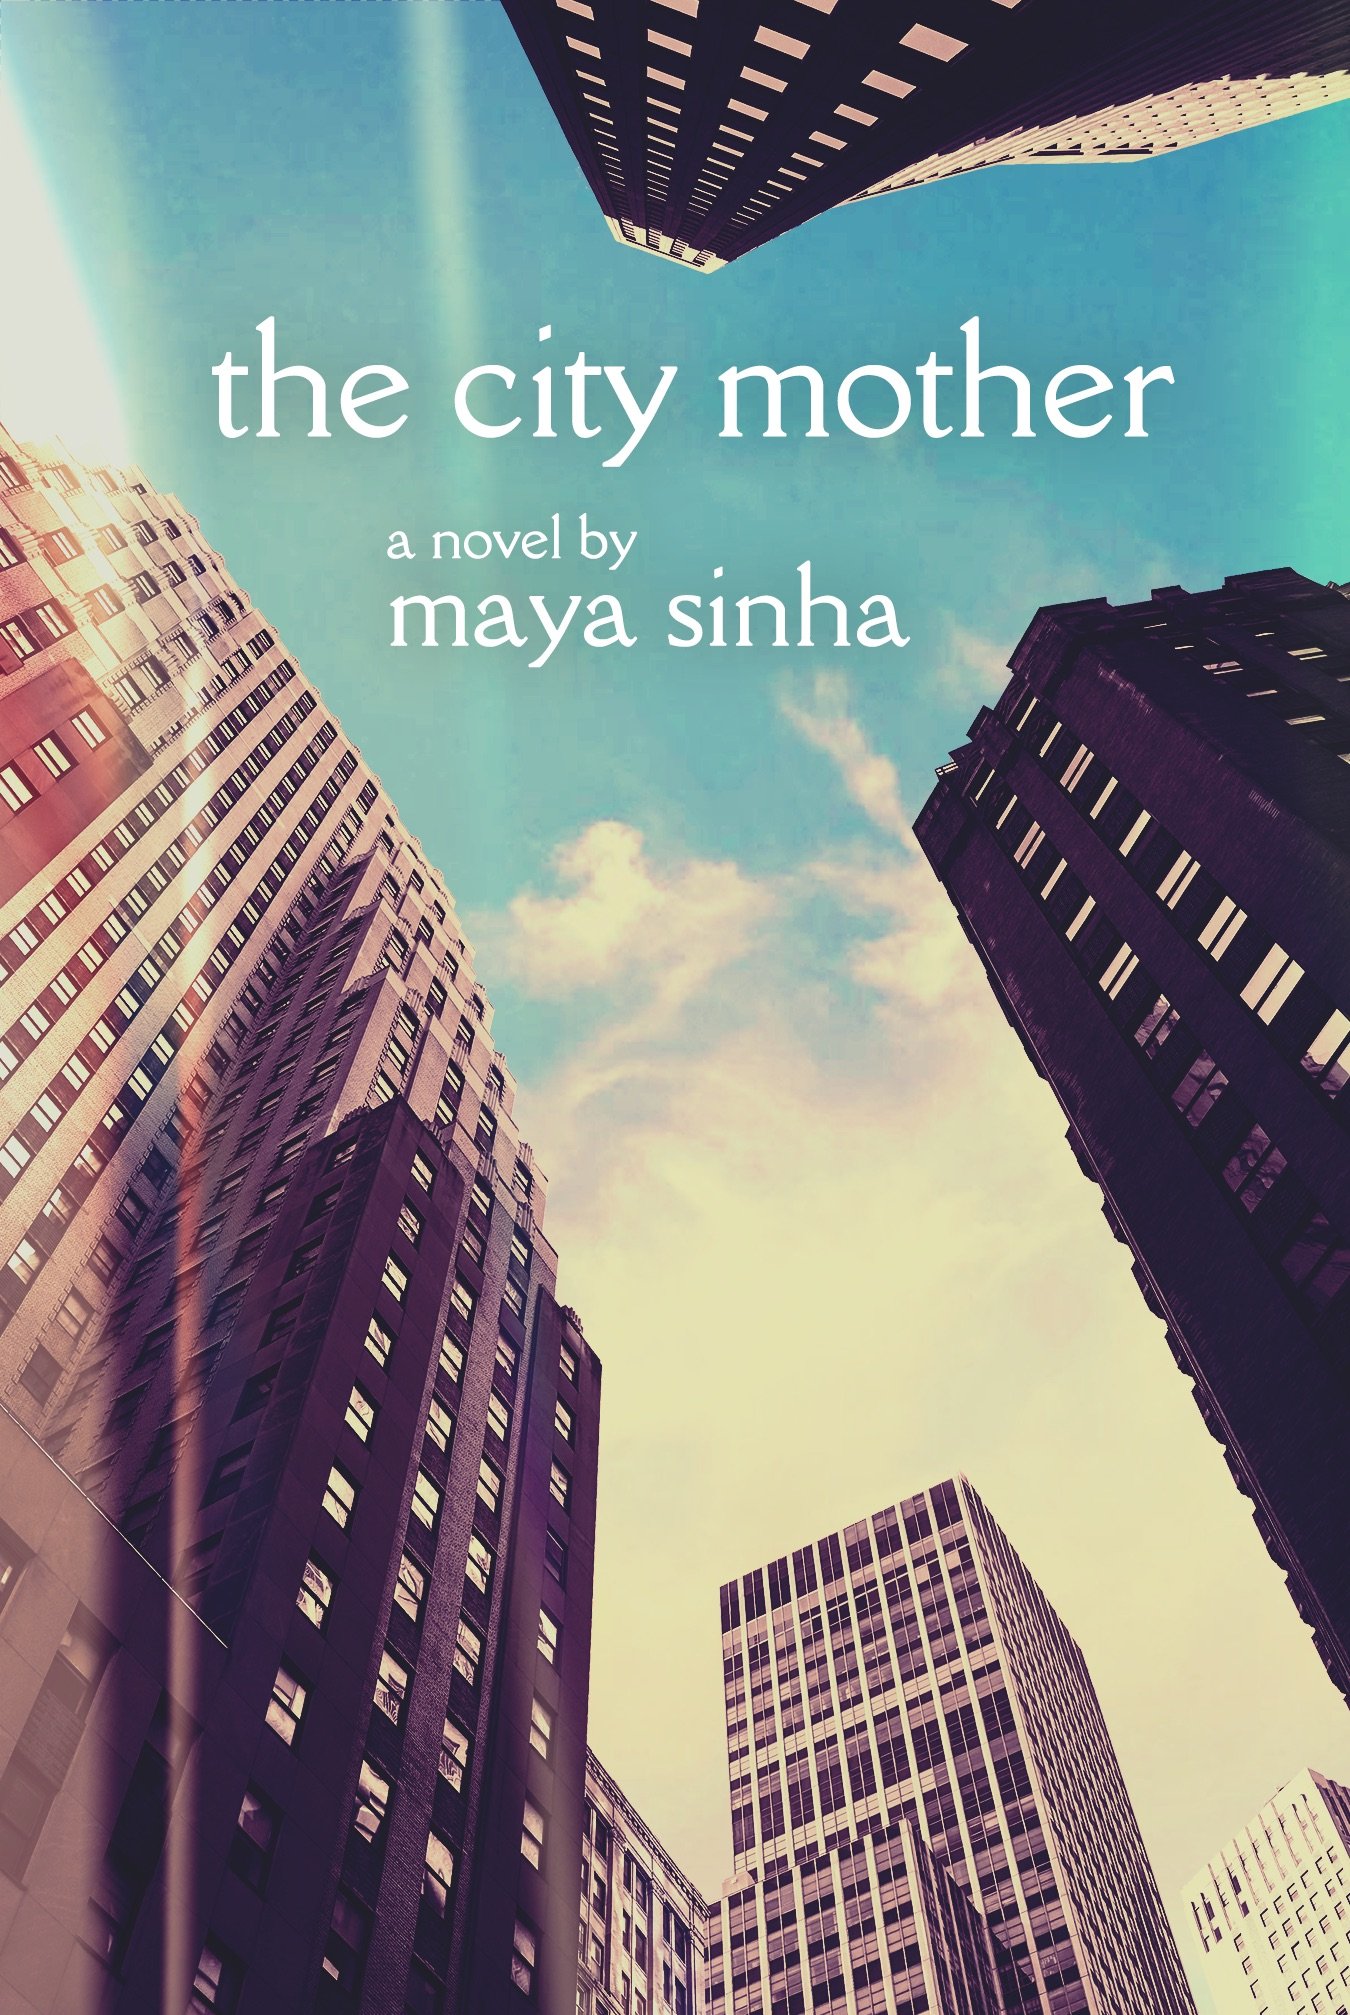 The City Mother book cover